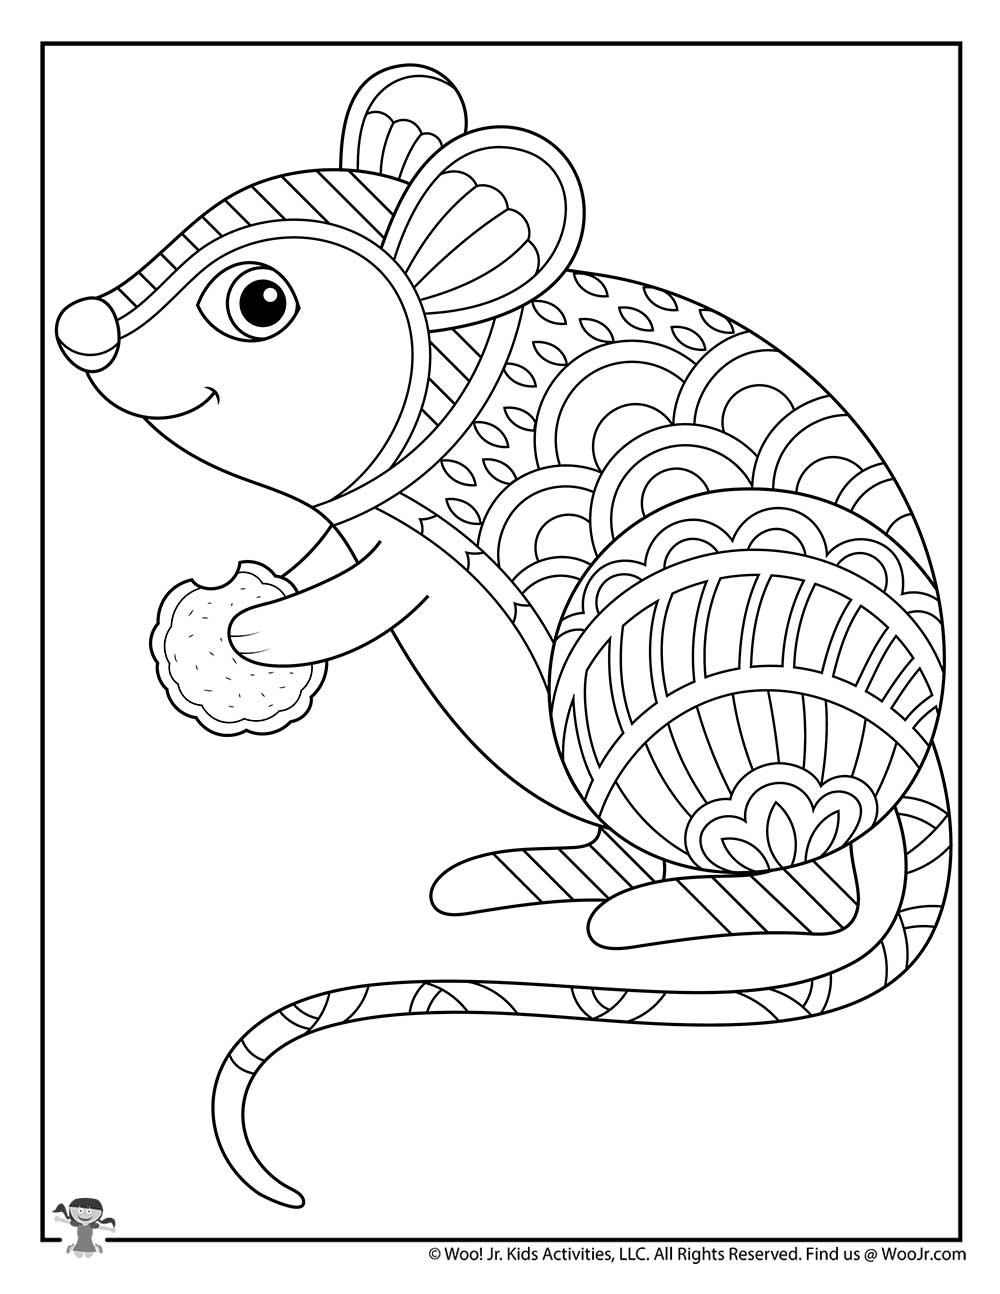 Cute Mouse Adult Coloring Page to Print | Woo! Jr. Kids Activities :  Children's Publishing